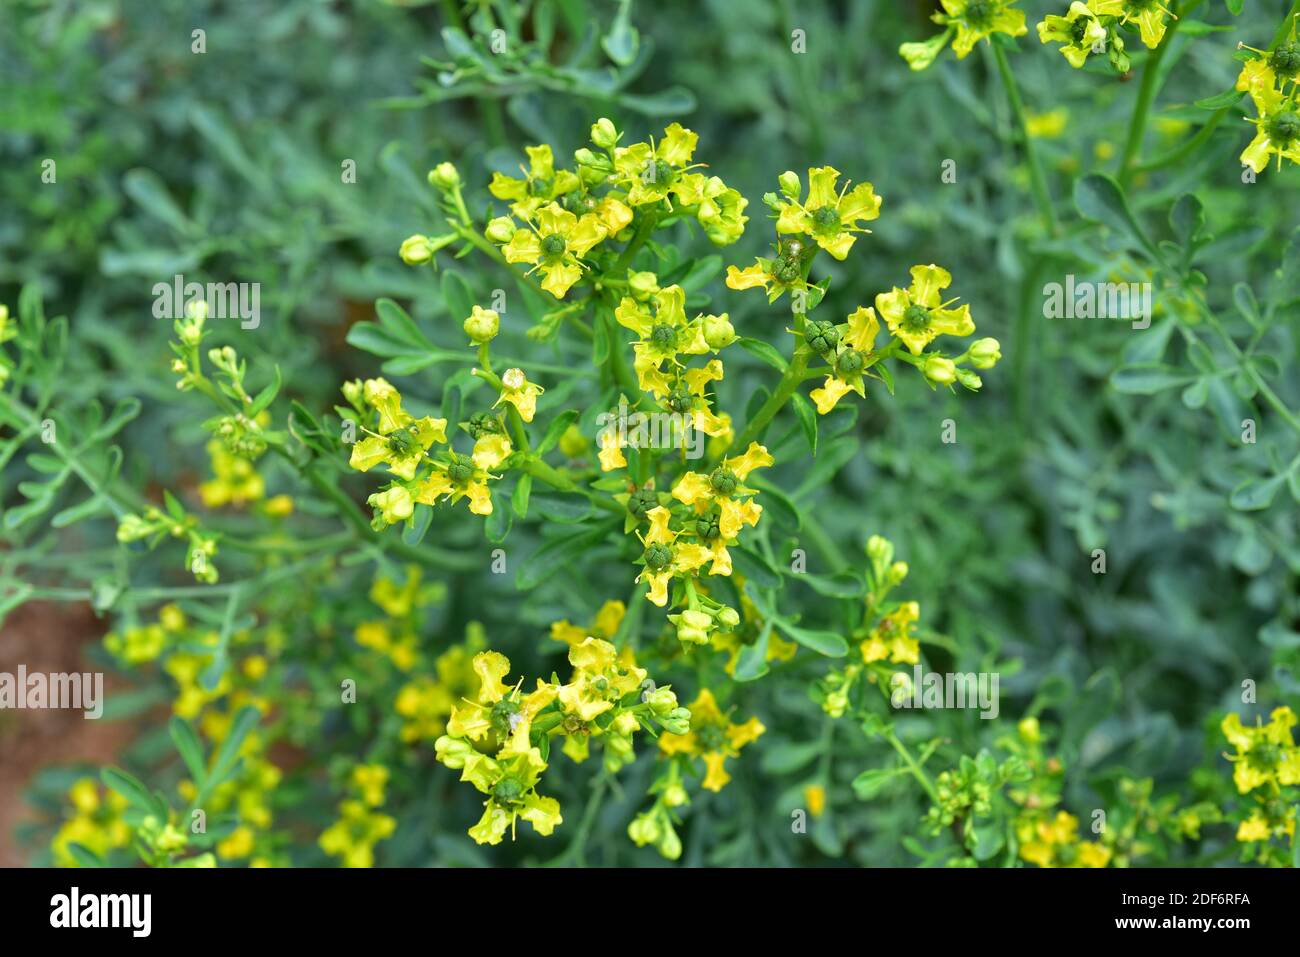 Common rue (Ruta graveolens) is a medicinal and toxic perennial herb native to Balkan Peninsula. Flowers and fruits detail. Stock Photo